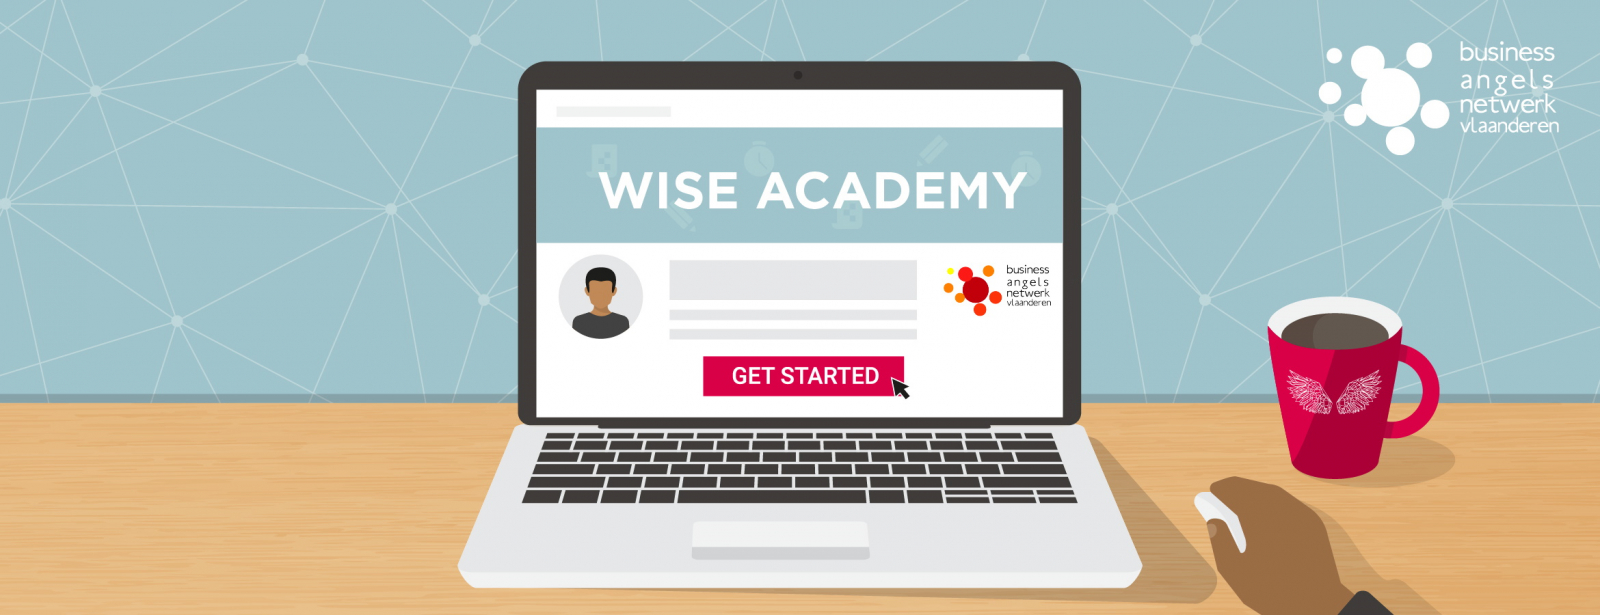 wise academy BAN 